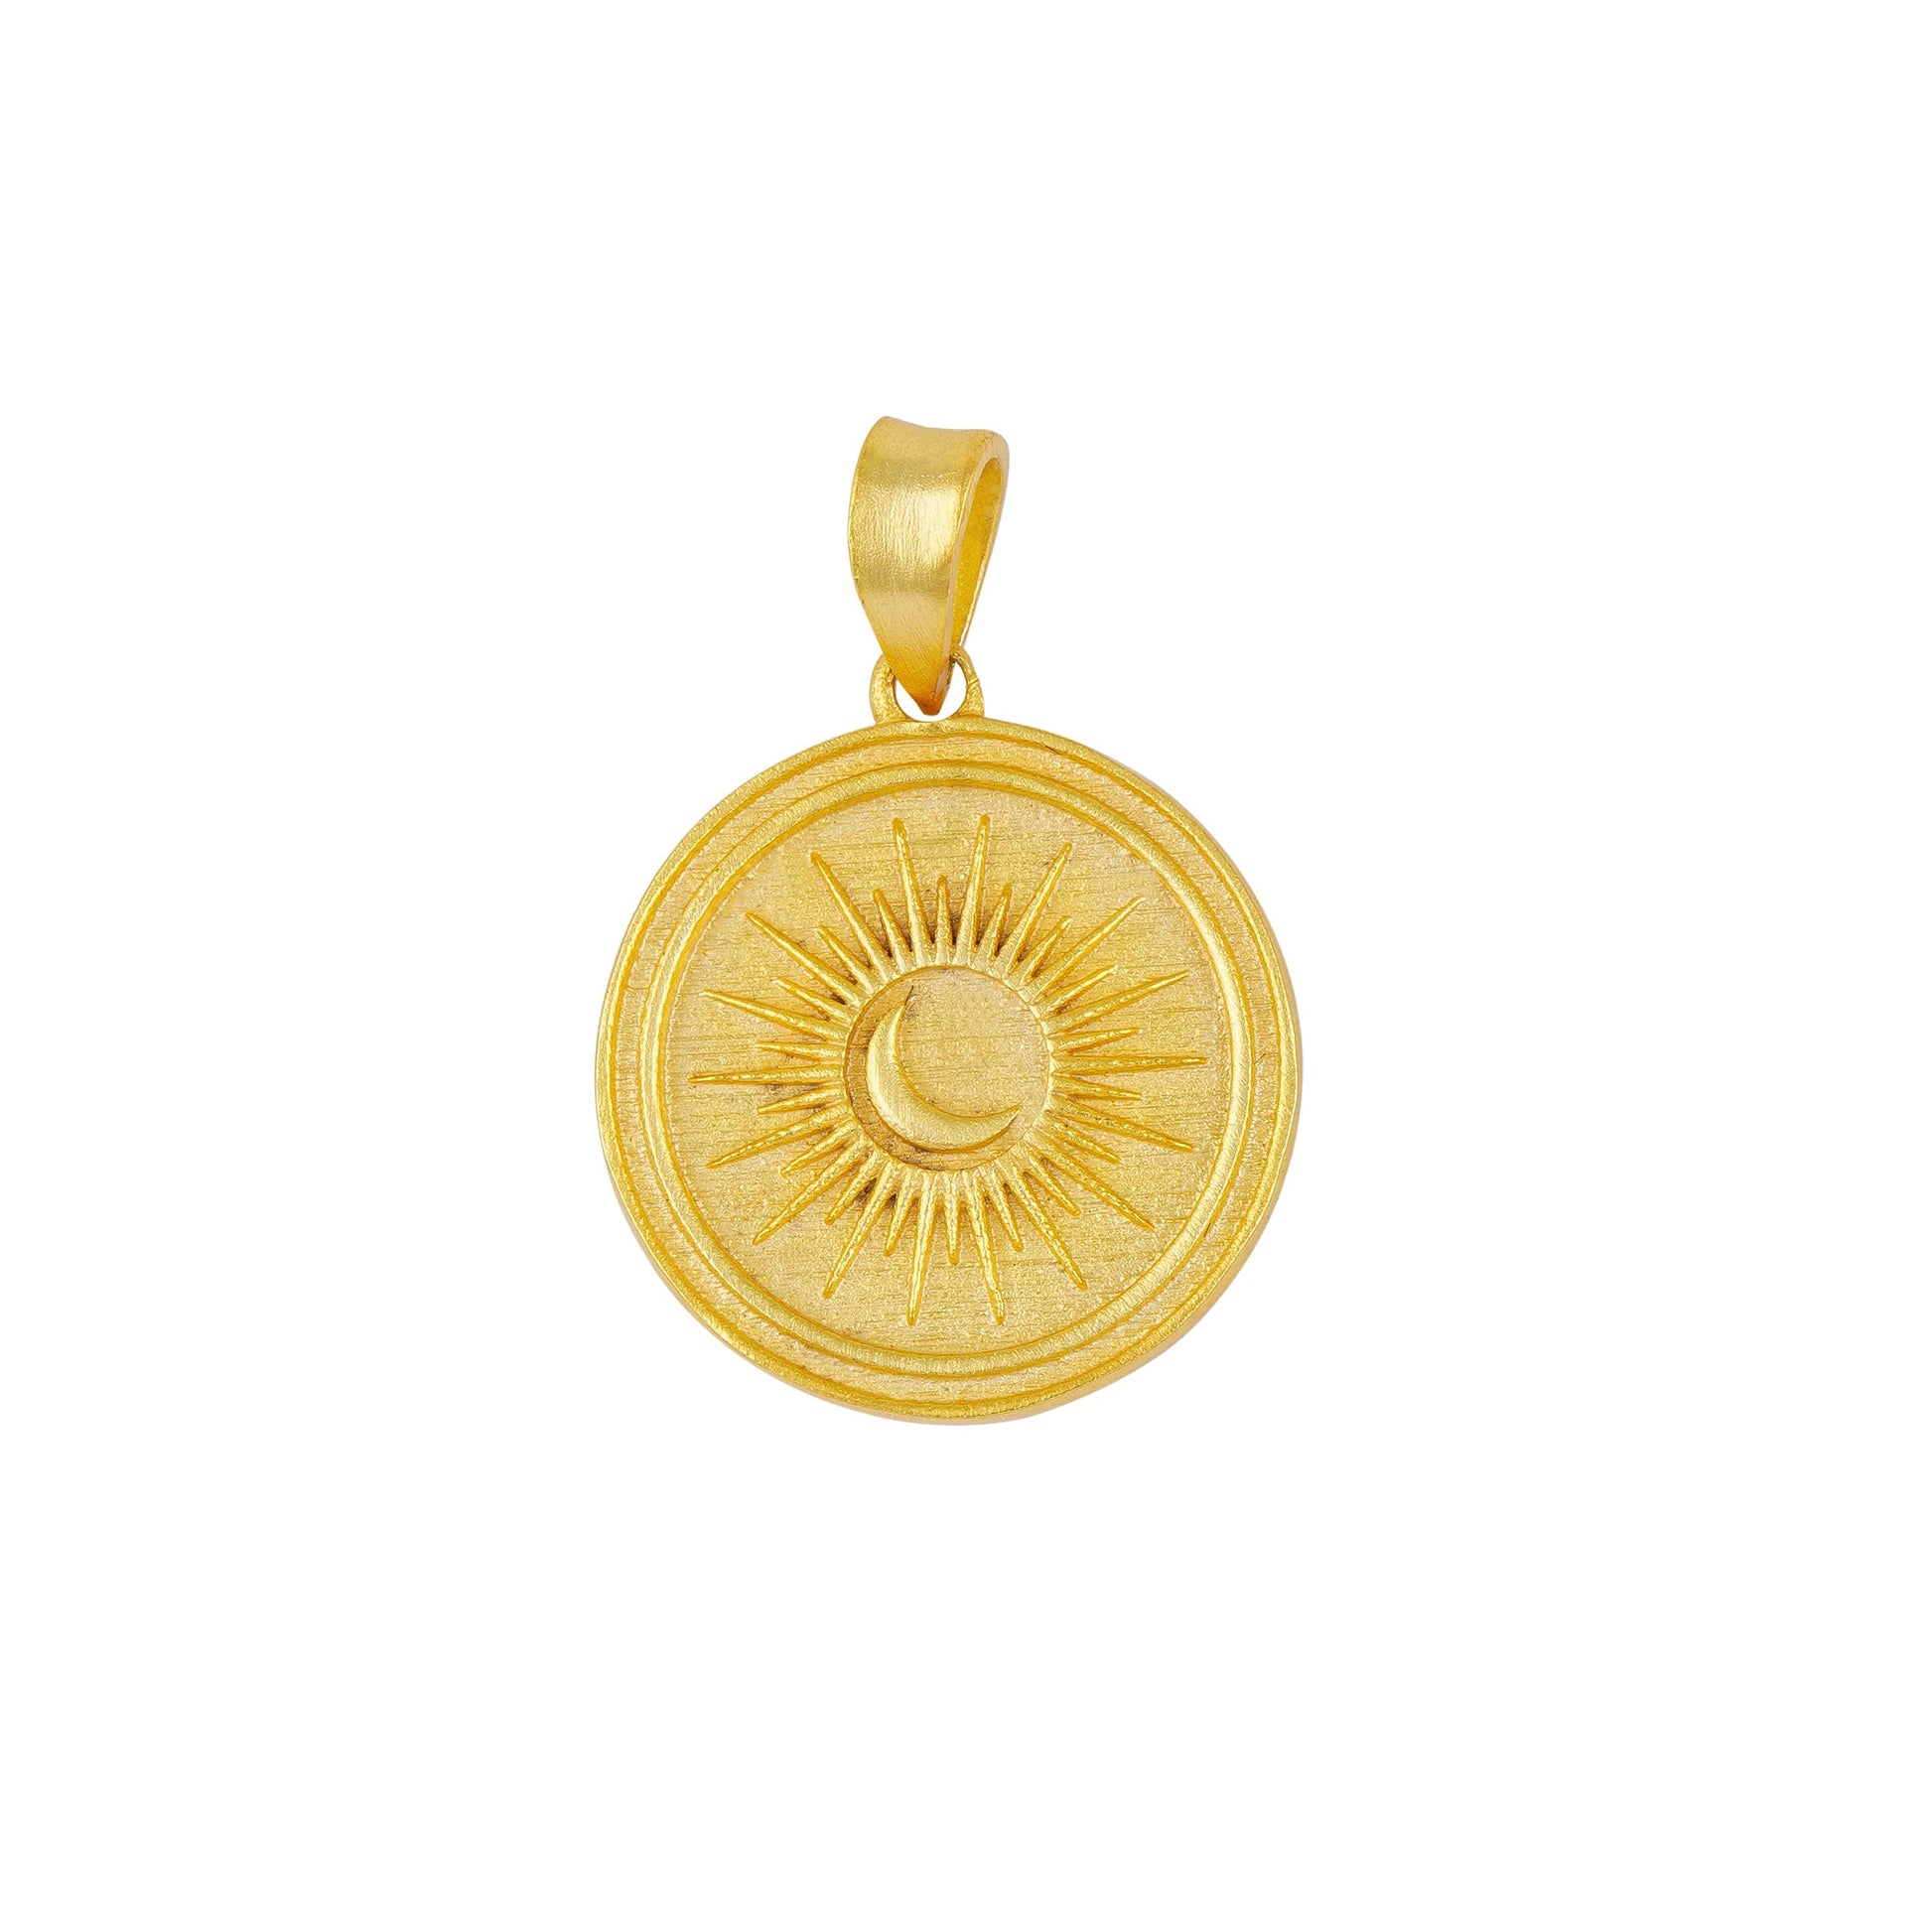 Power of Belief Coin Necklace - Power of Opposites